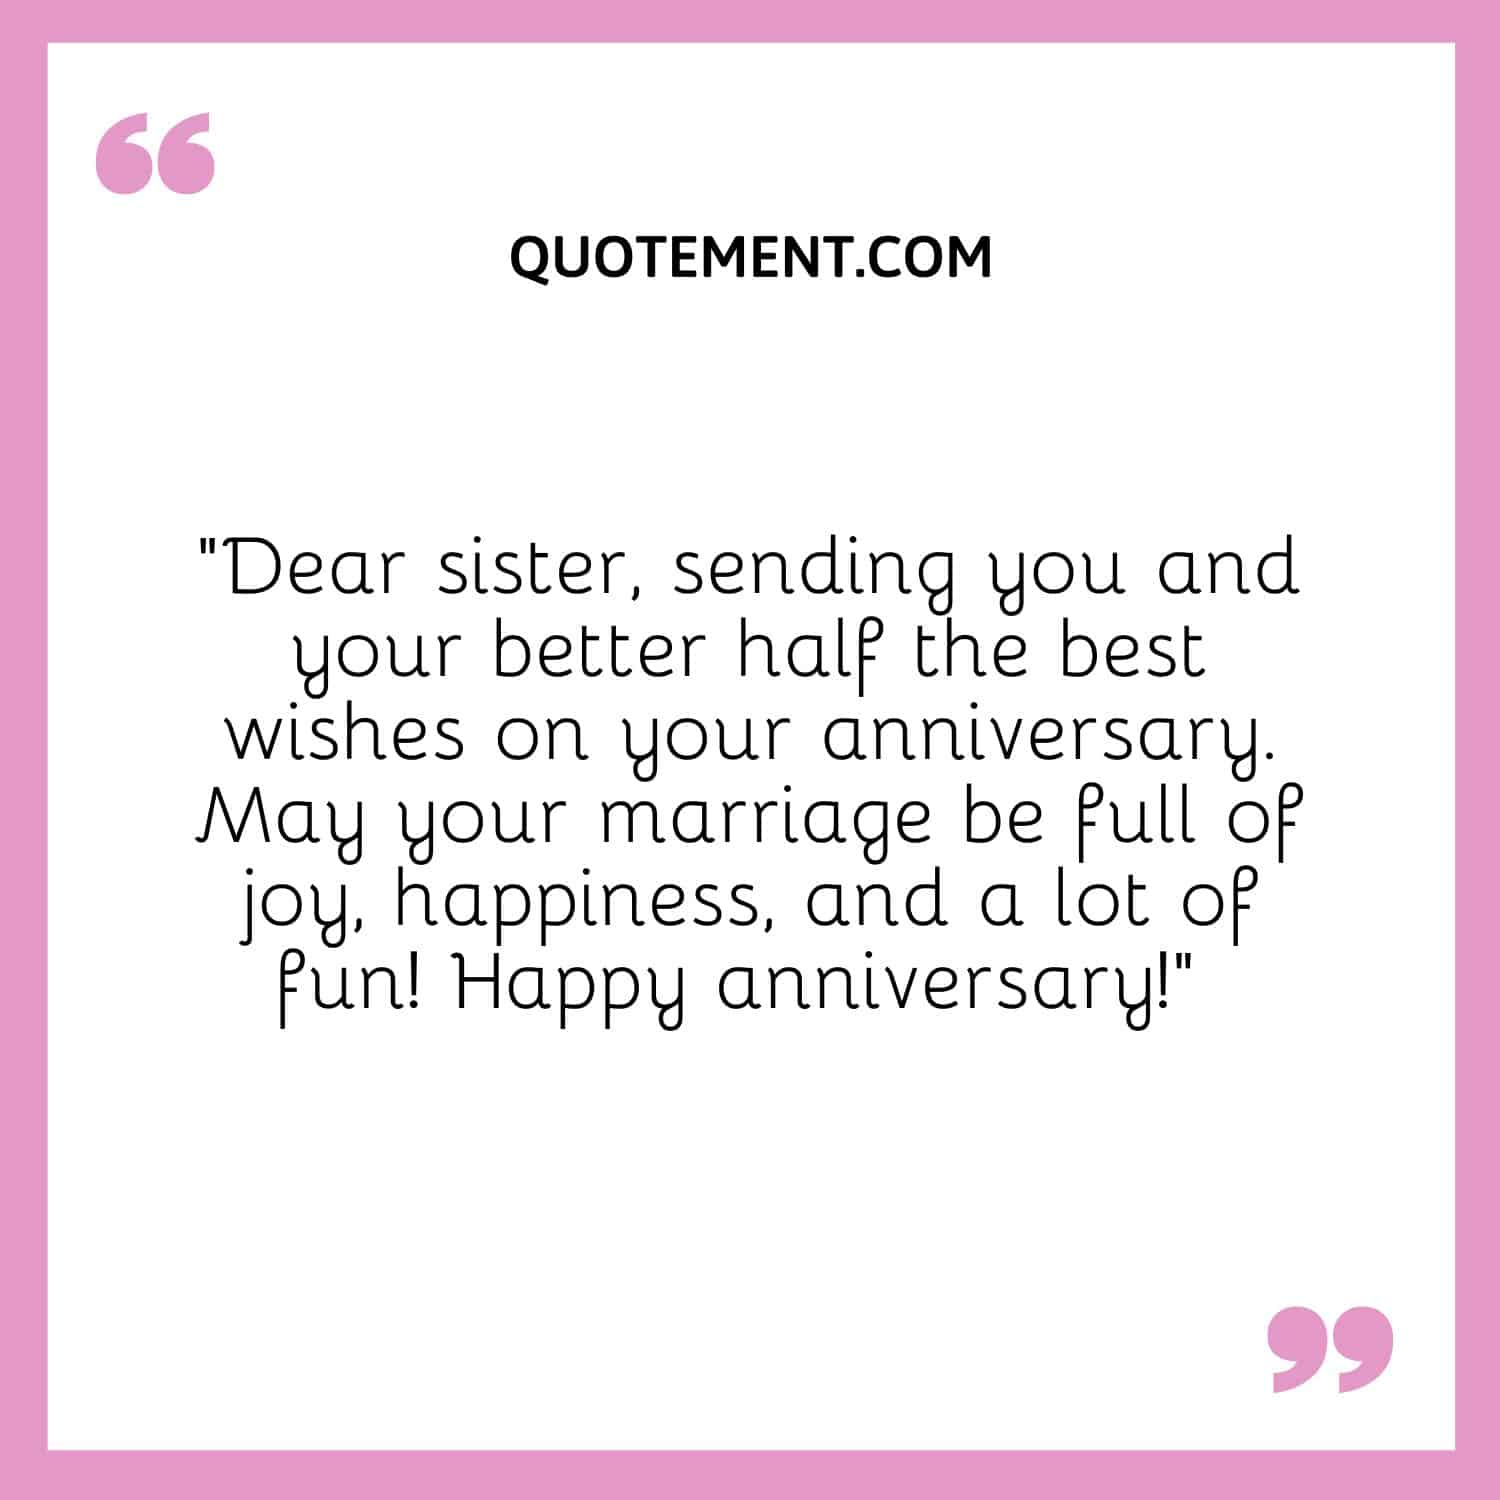 Dear sister, sending you and your better half the best wishes on your anniversary